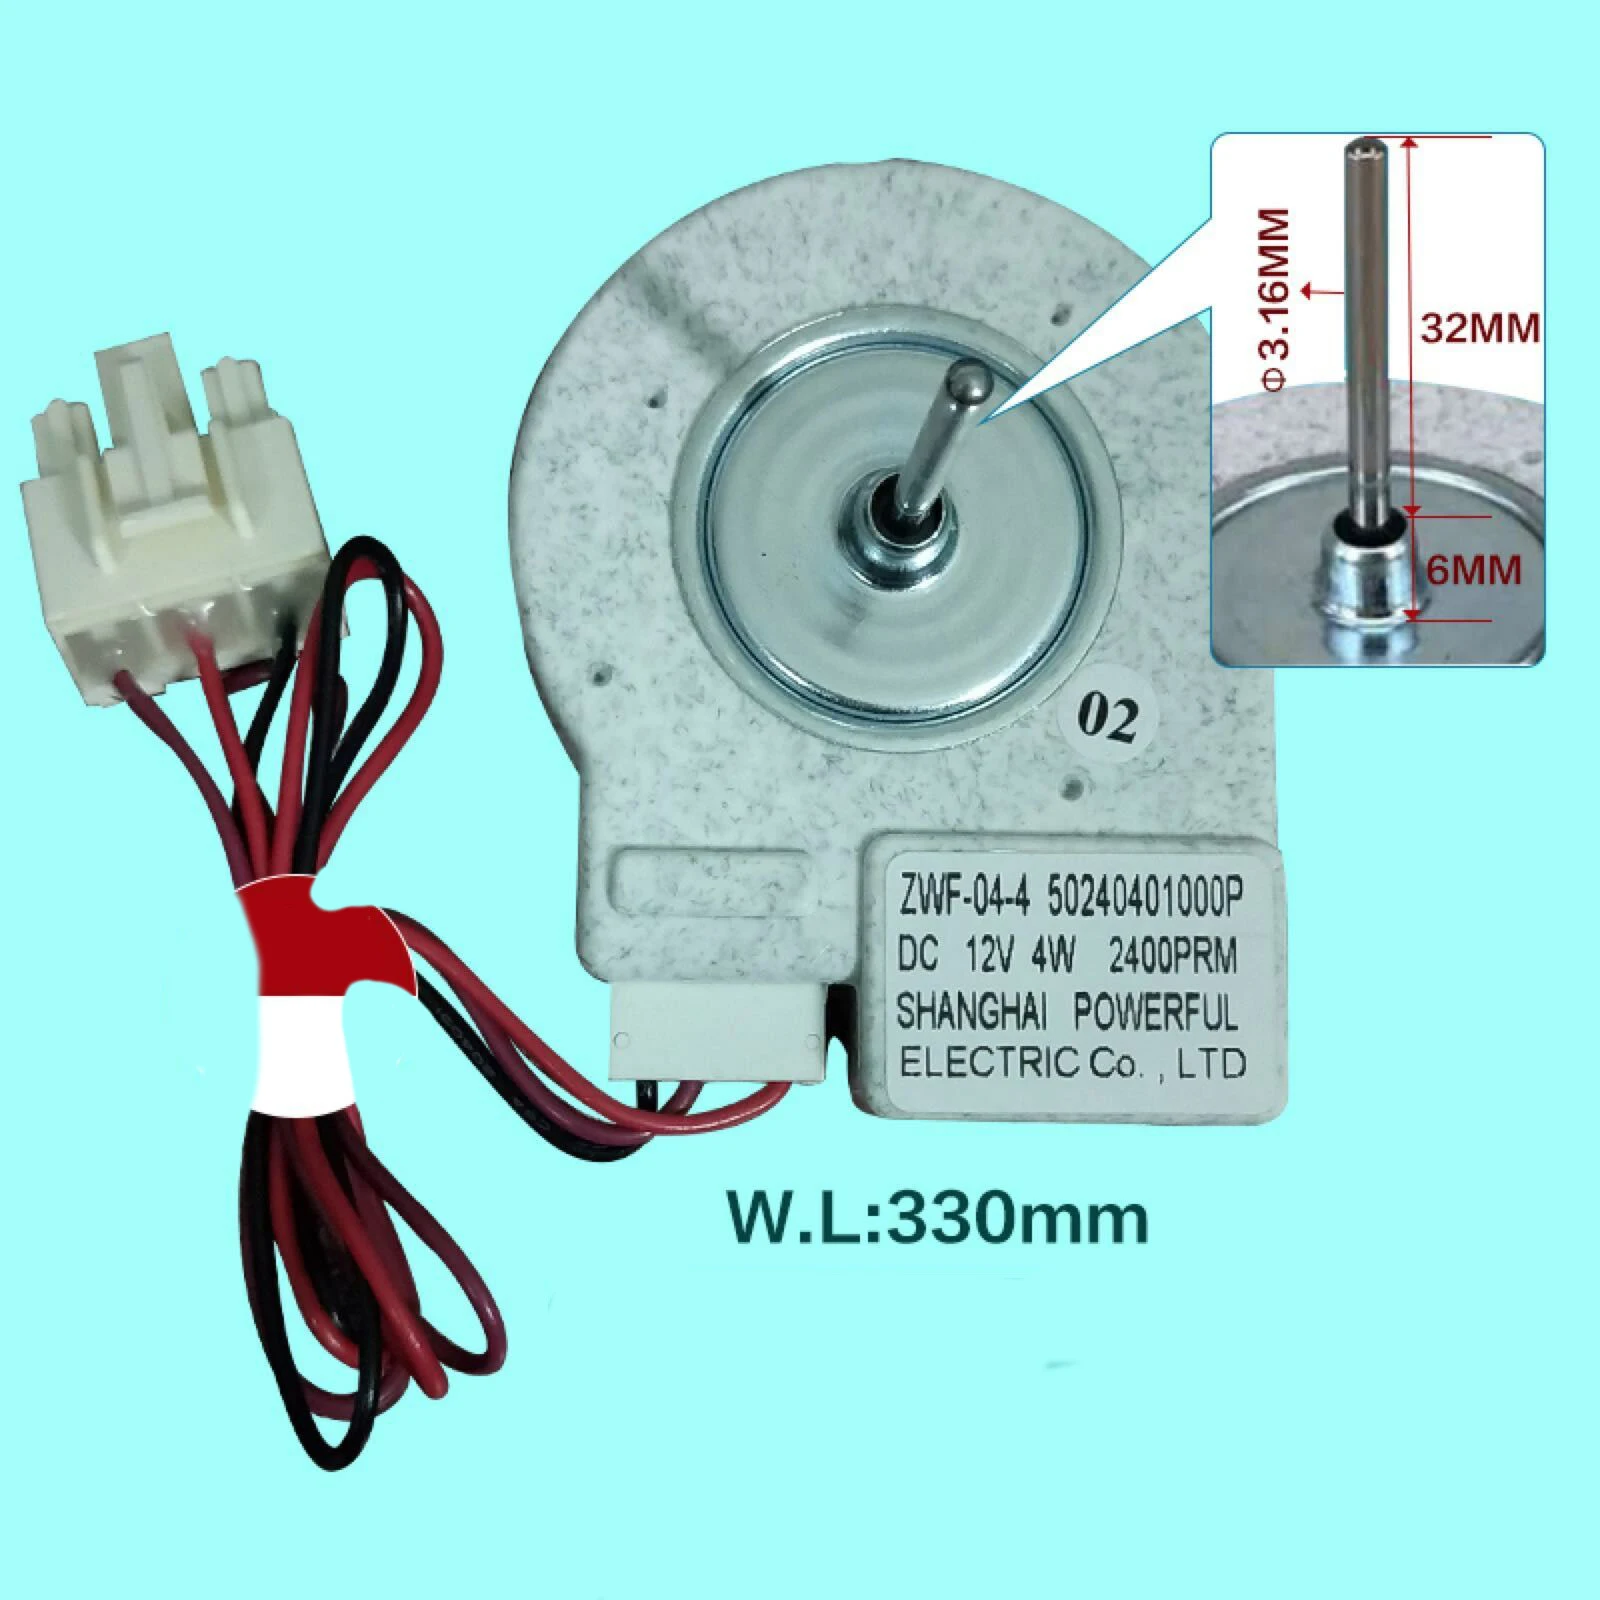 

Replacement Universal Fan Motor for Midea Refrigerator BCD-330WTV Freezing Fan Motor ZWF-04-4 Type Refrigerator Accessories